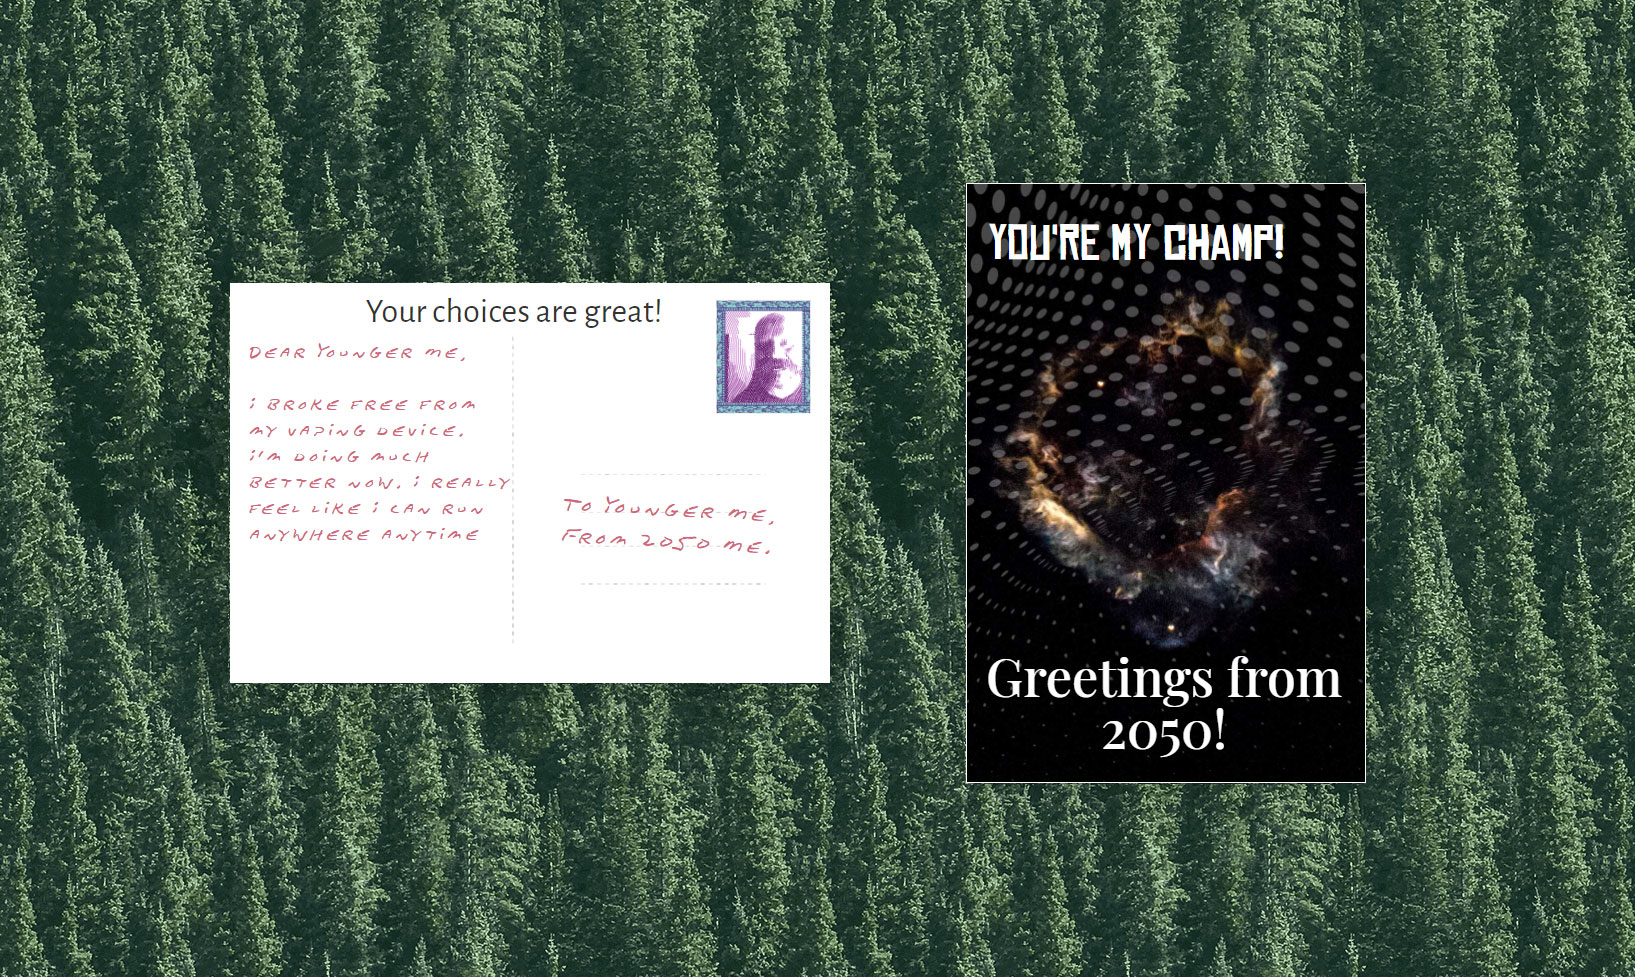 Front and back of postcards generated from nodfrom2050.ca